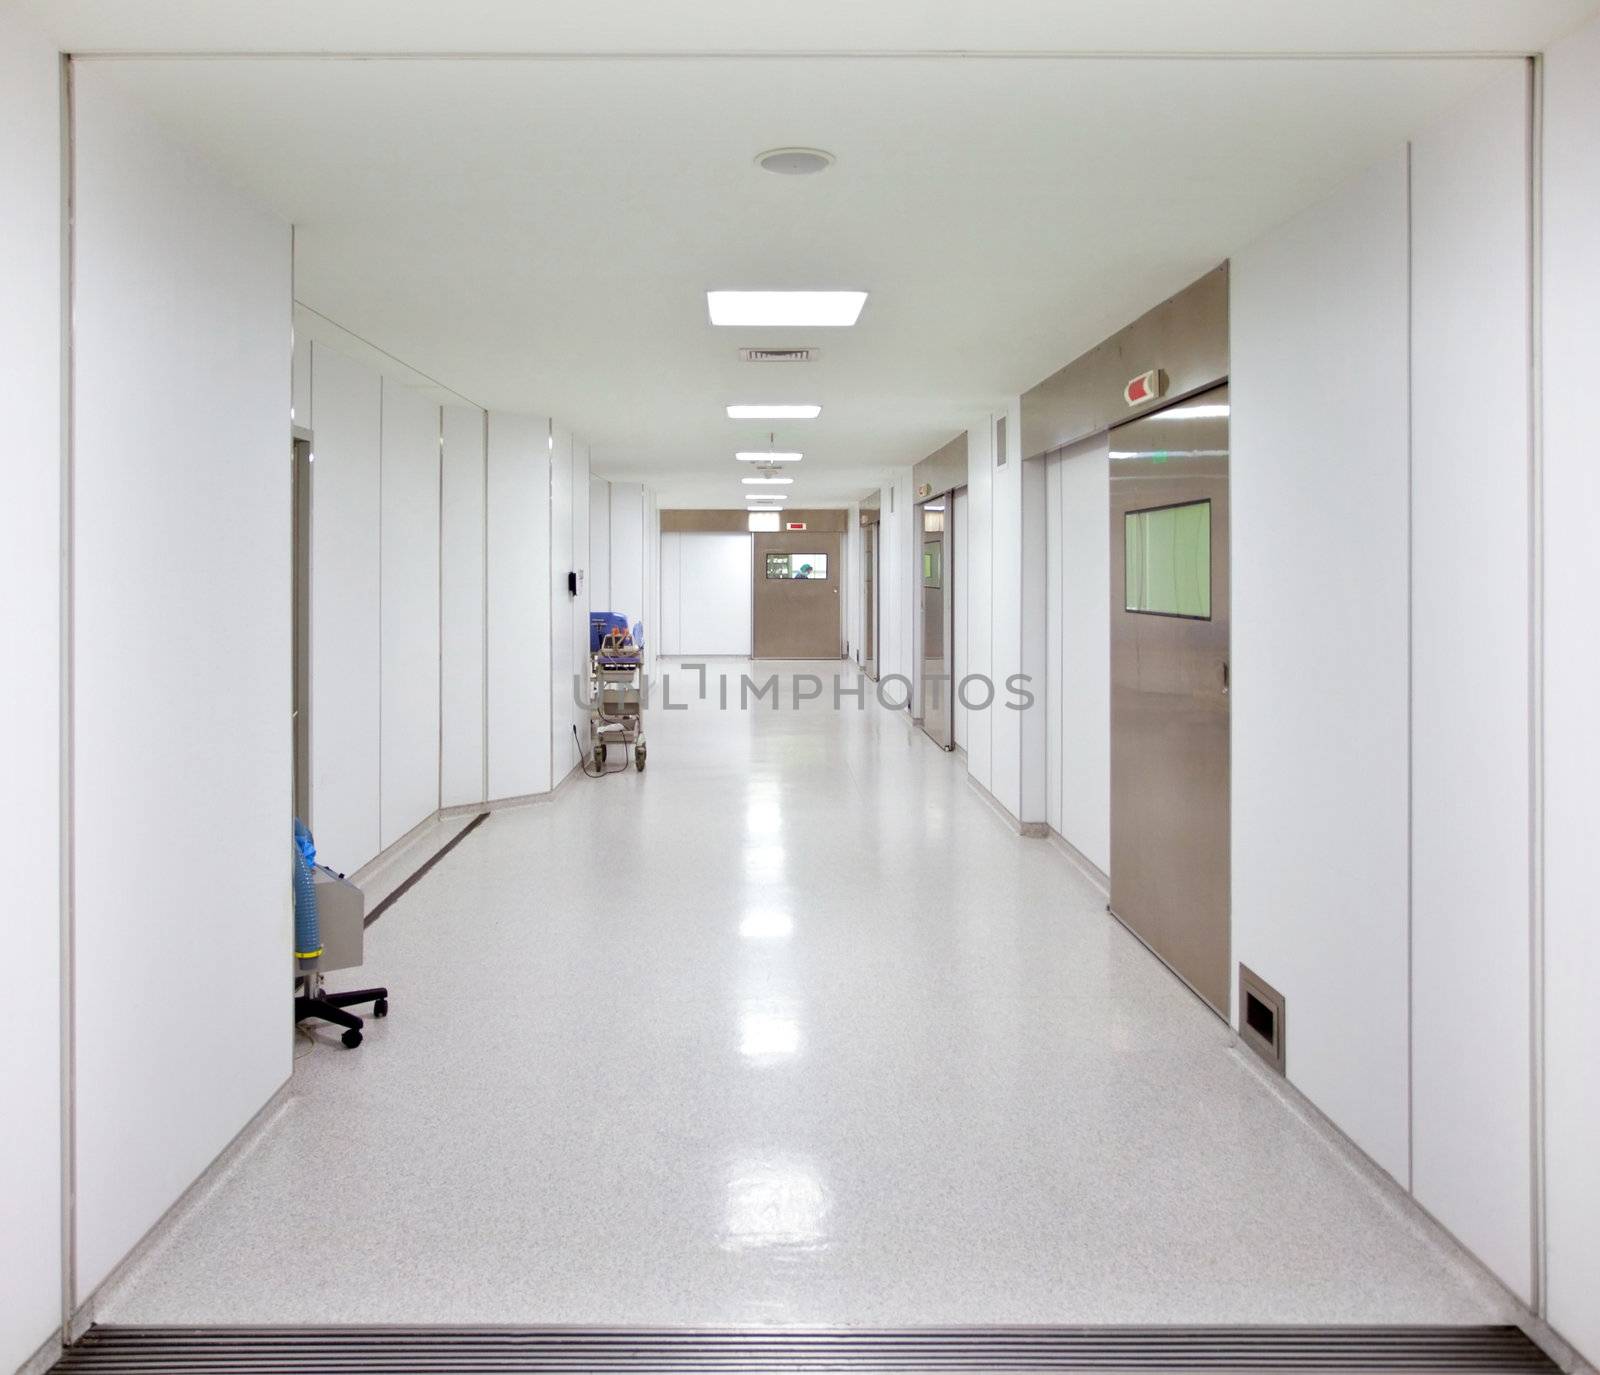 Long empty hospital surgery corridor with lamps turned on